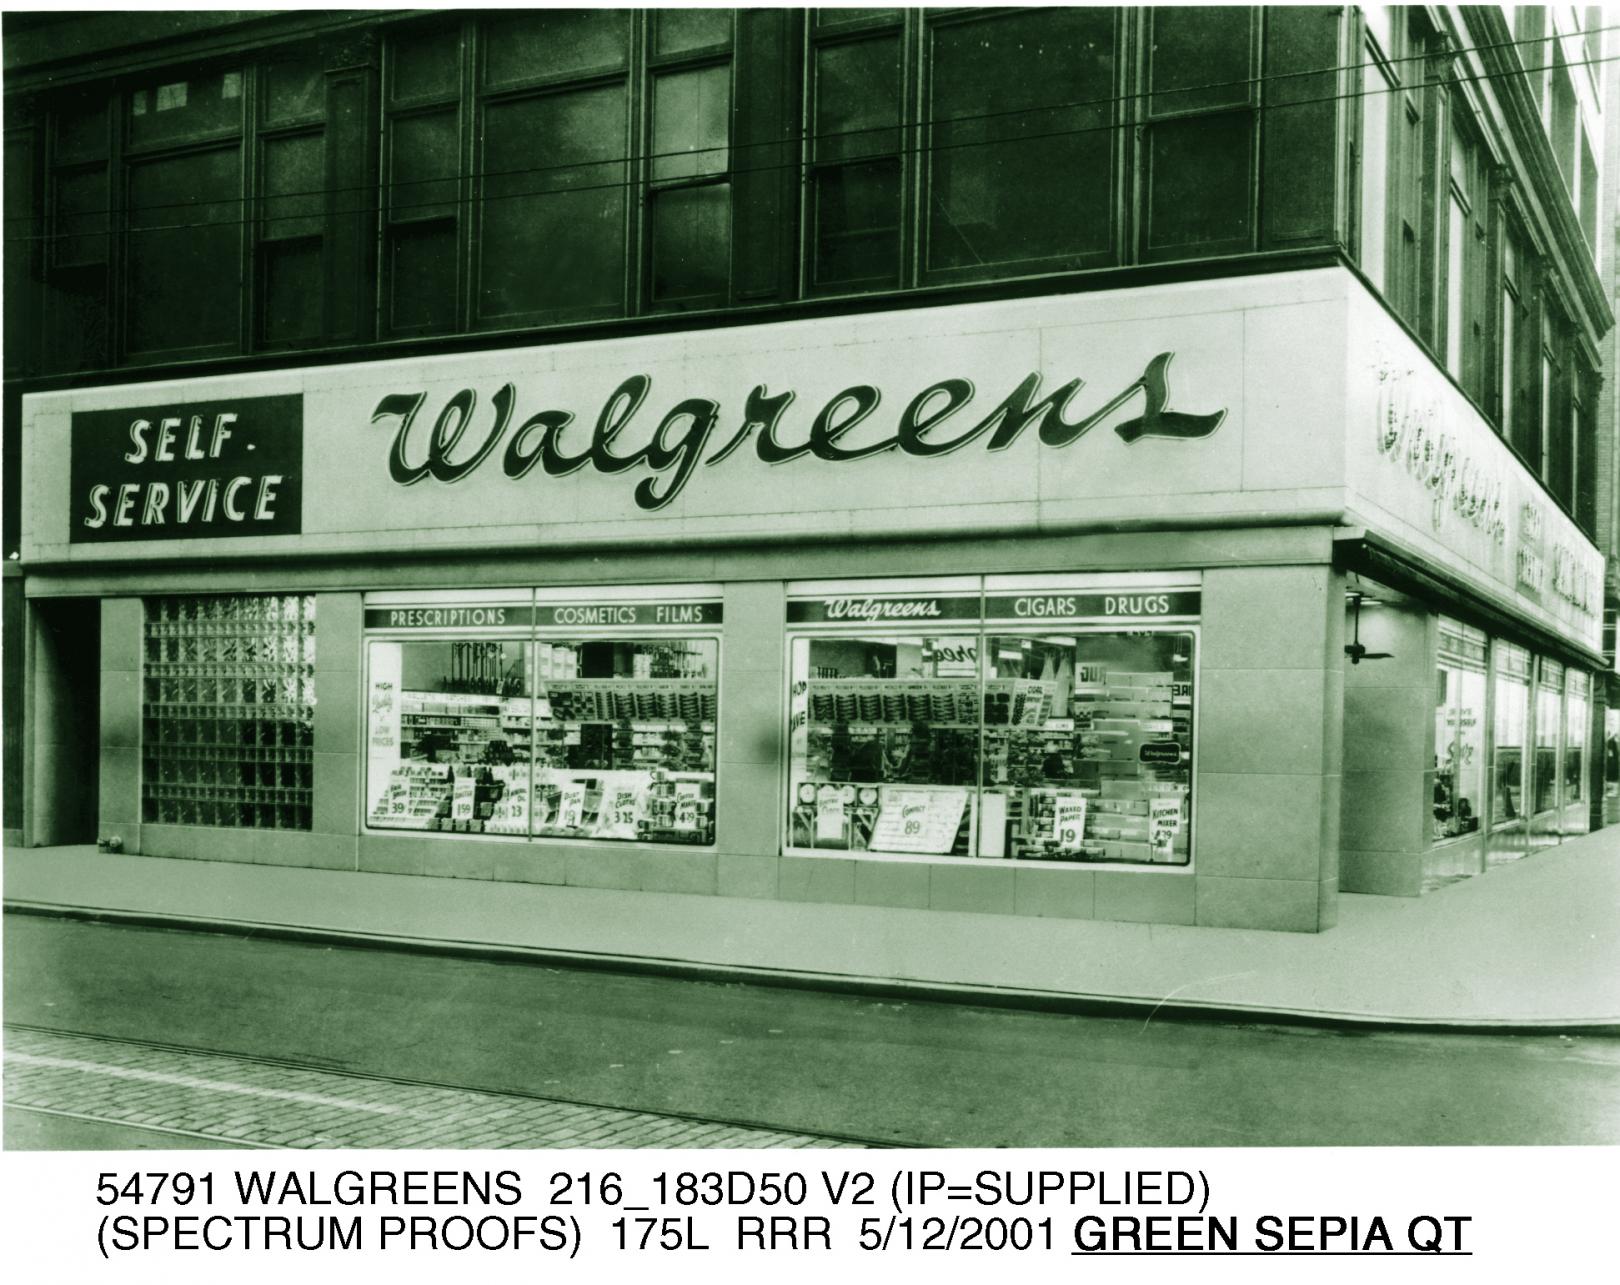 1950: Walgreens begins the transition to self-service stores. Moss Chemists prescription service delivery vans begin operating